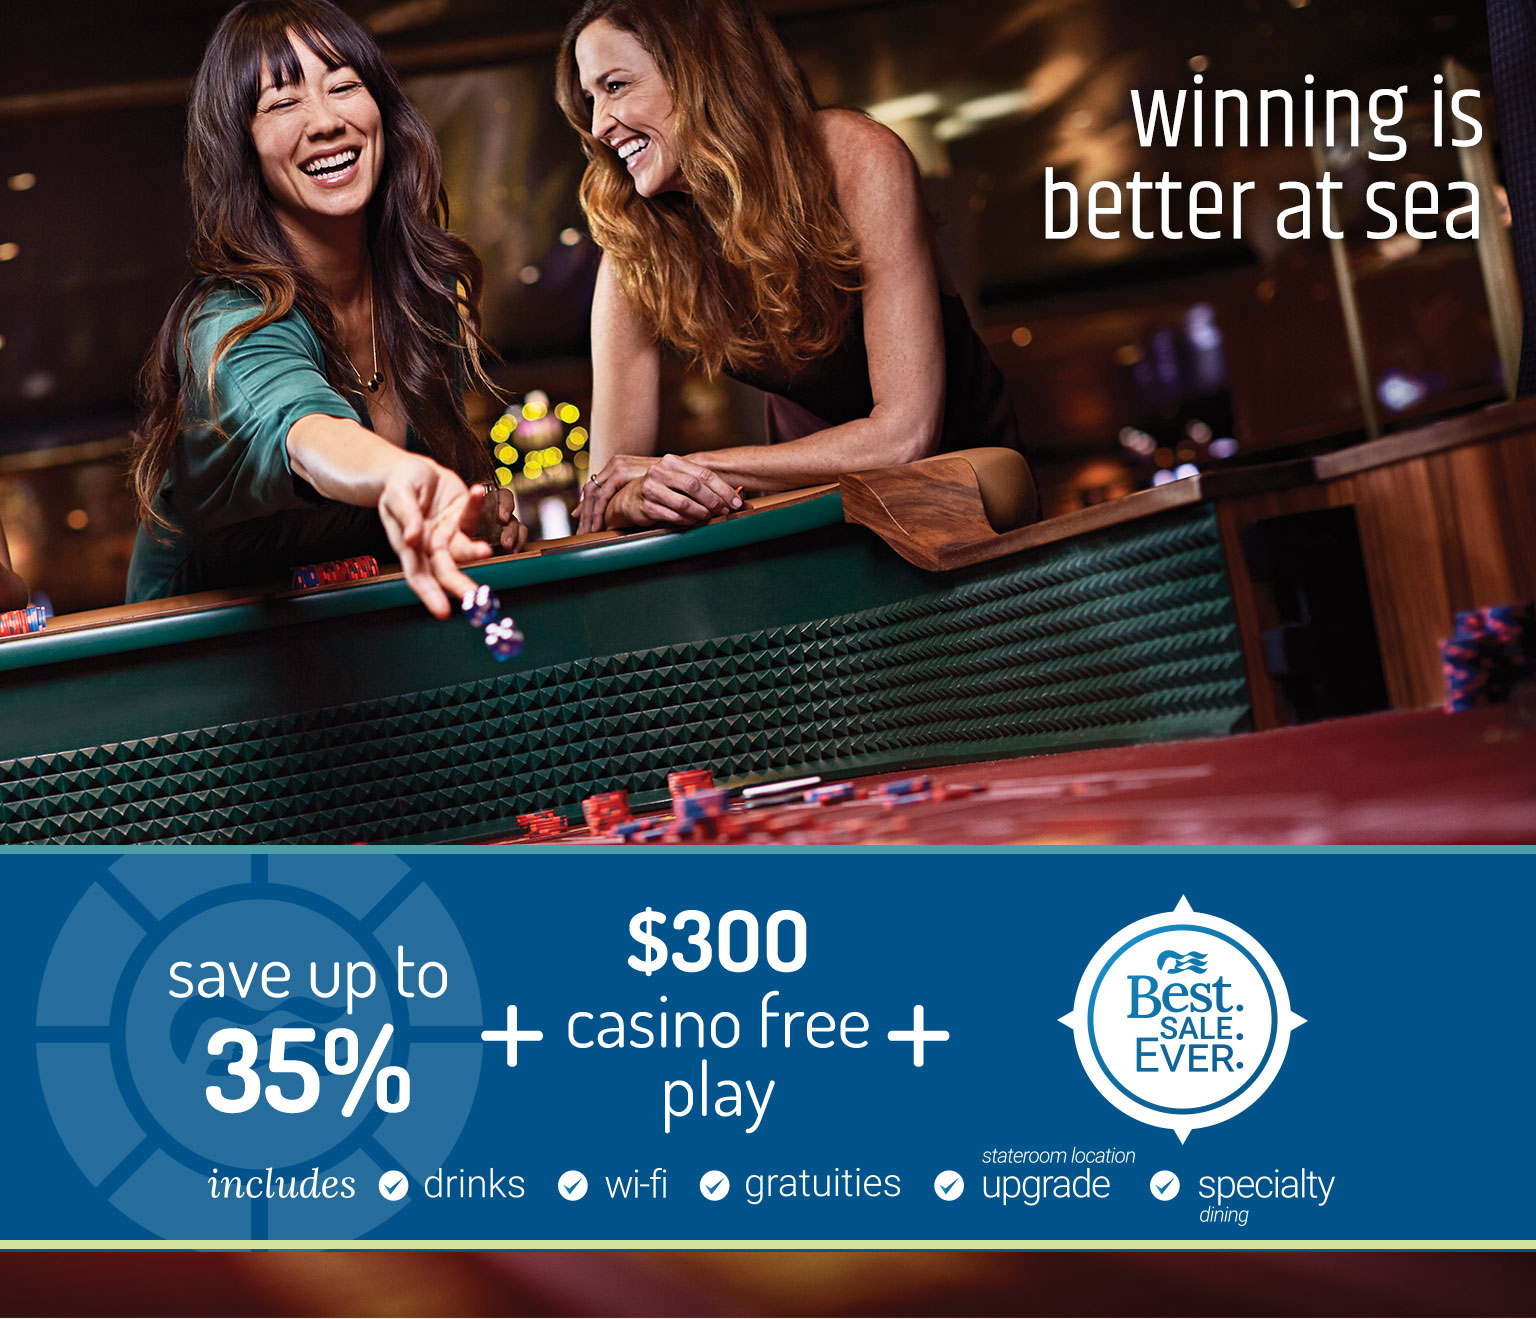 Winning is better at sea - Save up to 35% + $300 casino free play + Best. Sale. Ever.